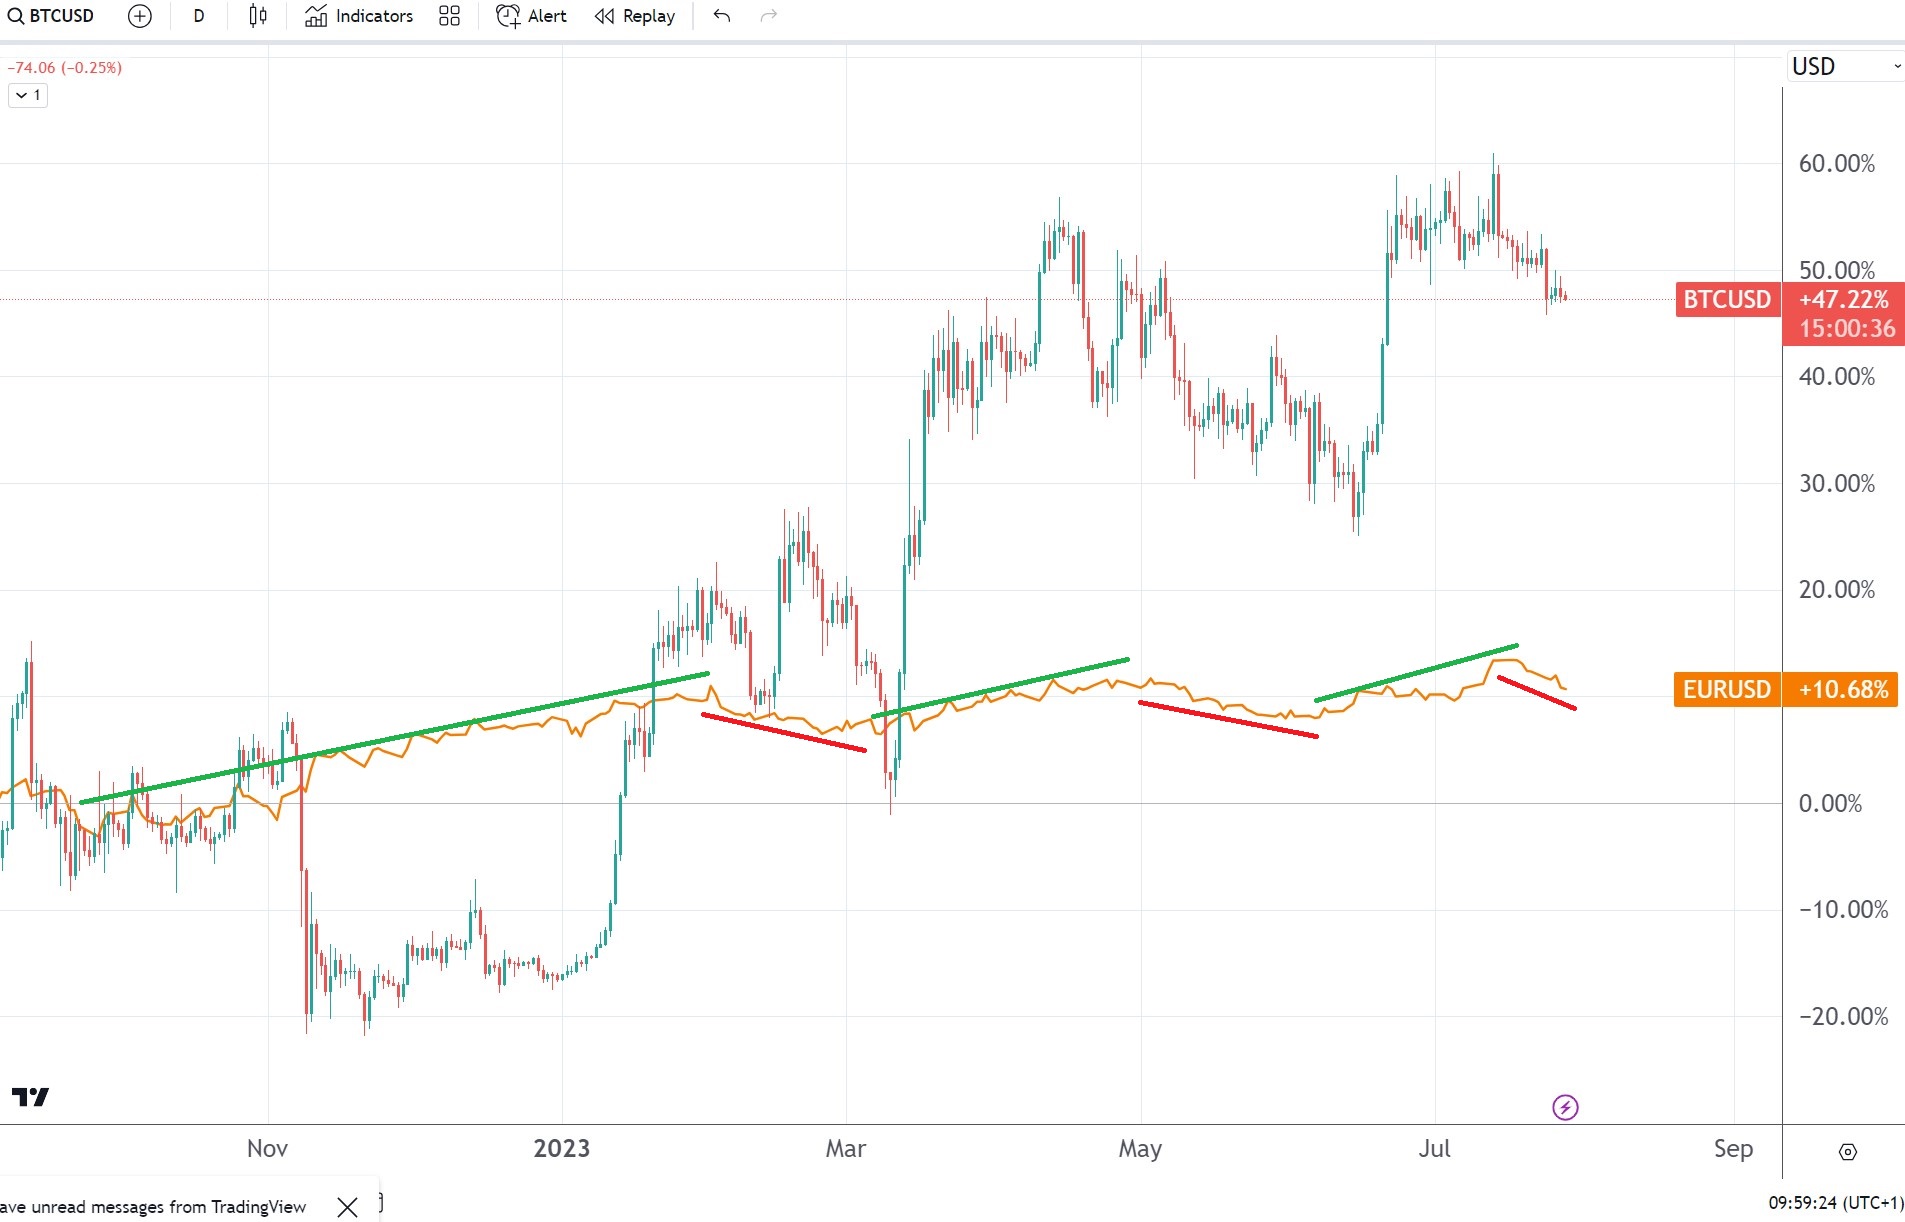 Bitcoin price forecast with the help of EUR/USD